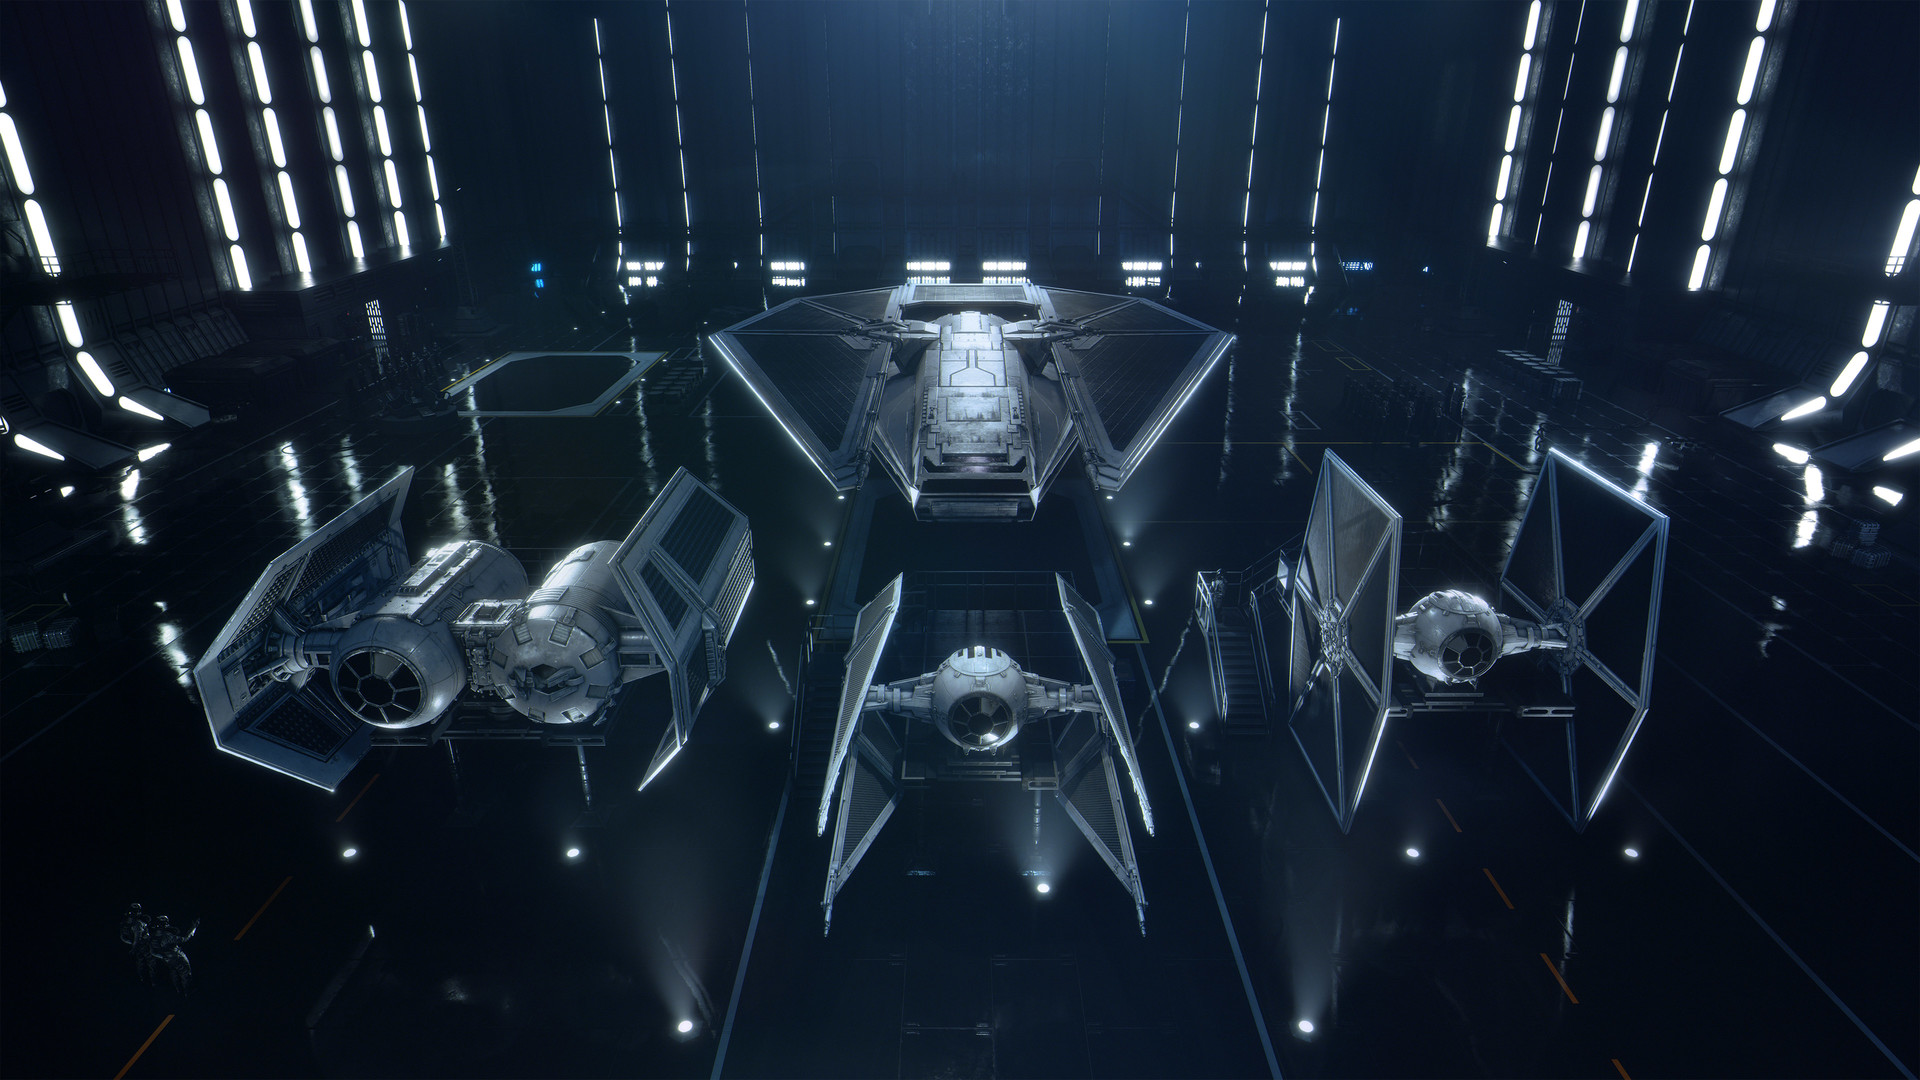 Star Wars: Squadrons is the epic space battle game you've been waiting for